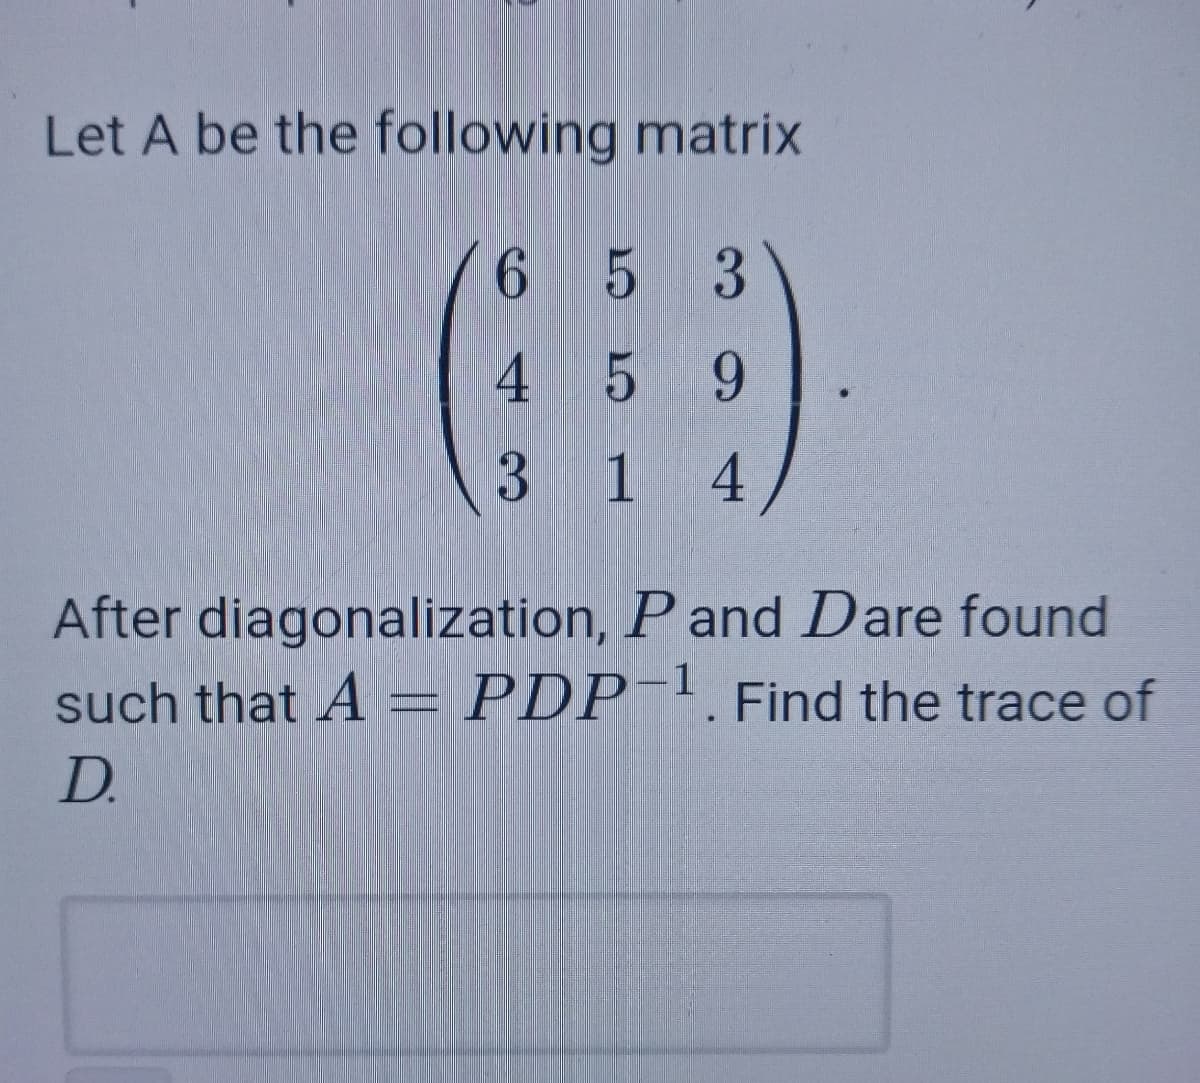 Let A be the following matrix
6 5 3
4 5 9
3 1
4/
After diagonalization, P and Dare found
such that A = PDP¯'.Find the trace of
1
D.
